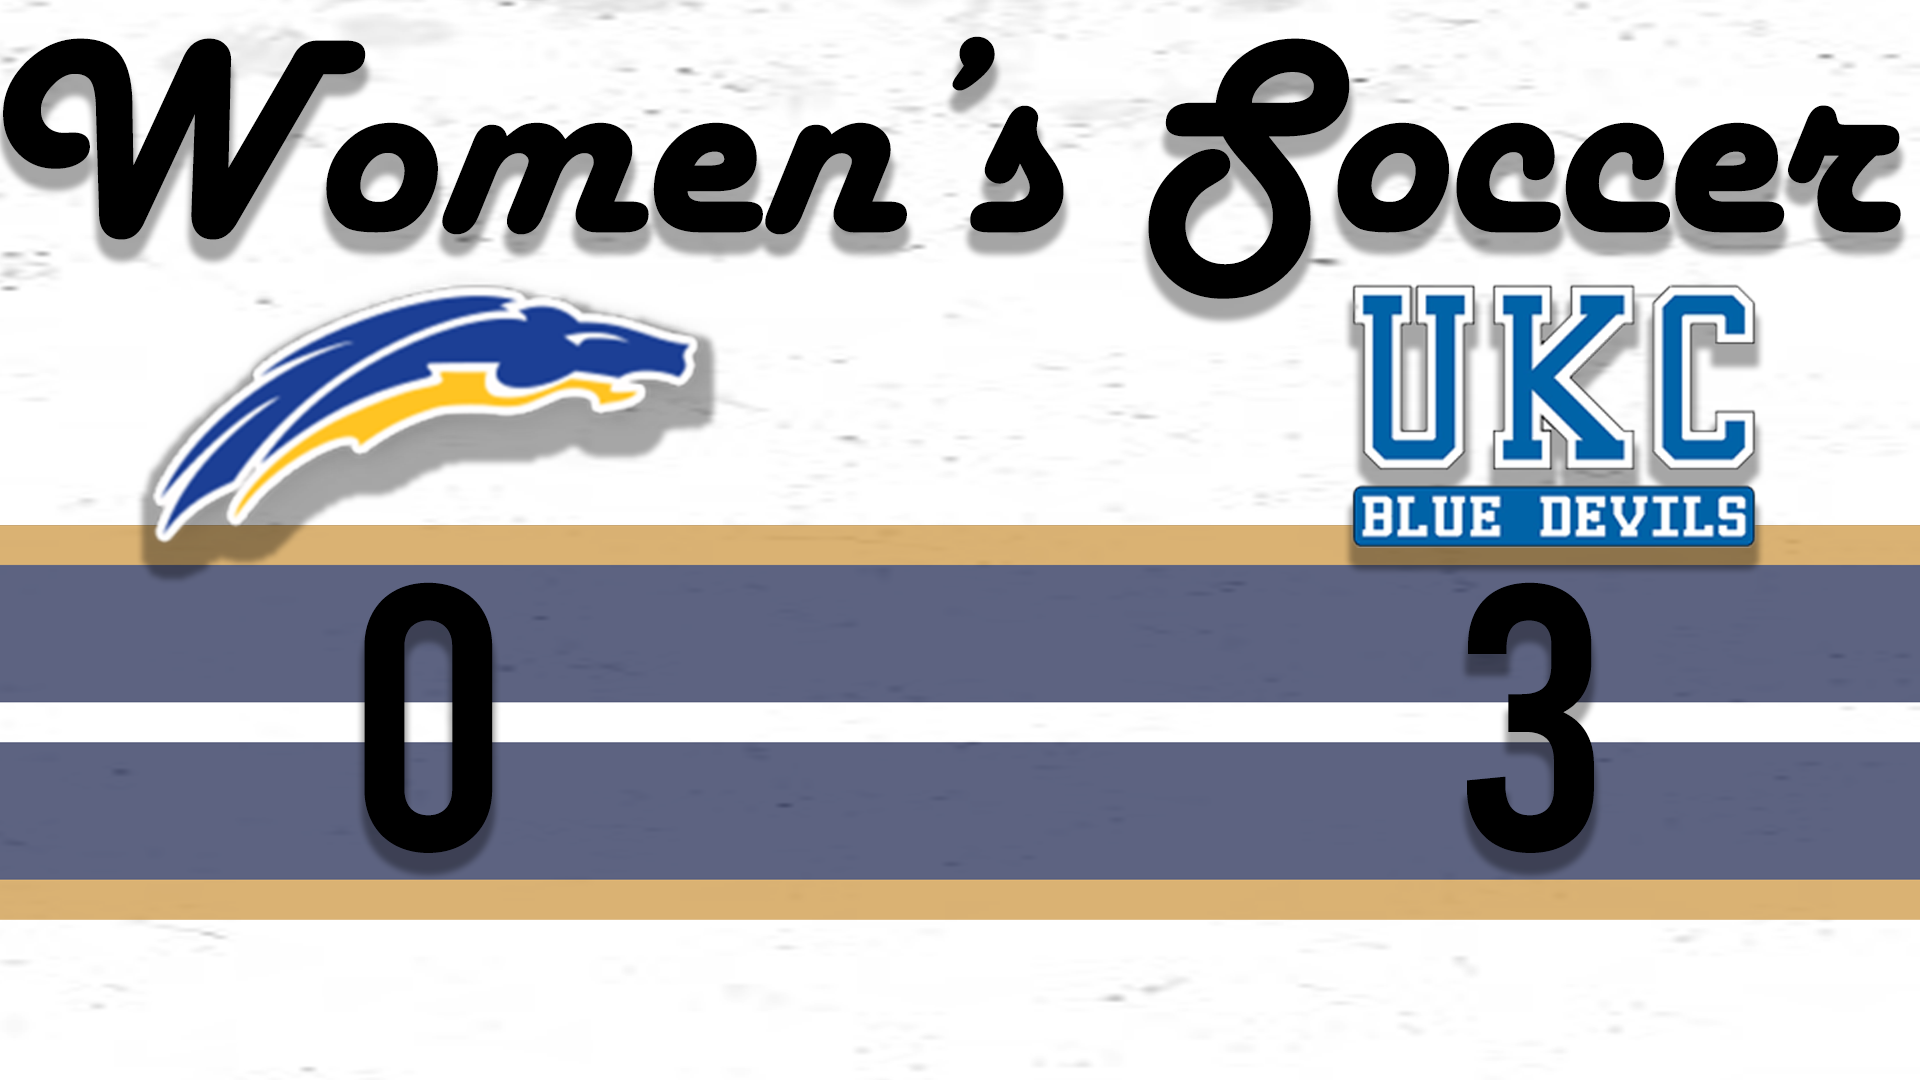 Chargers Shutout In Home Opener, UKC Win 3-0